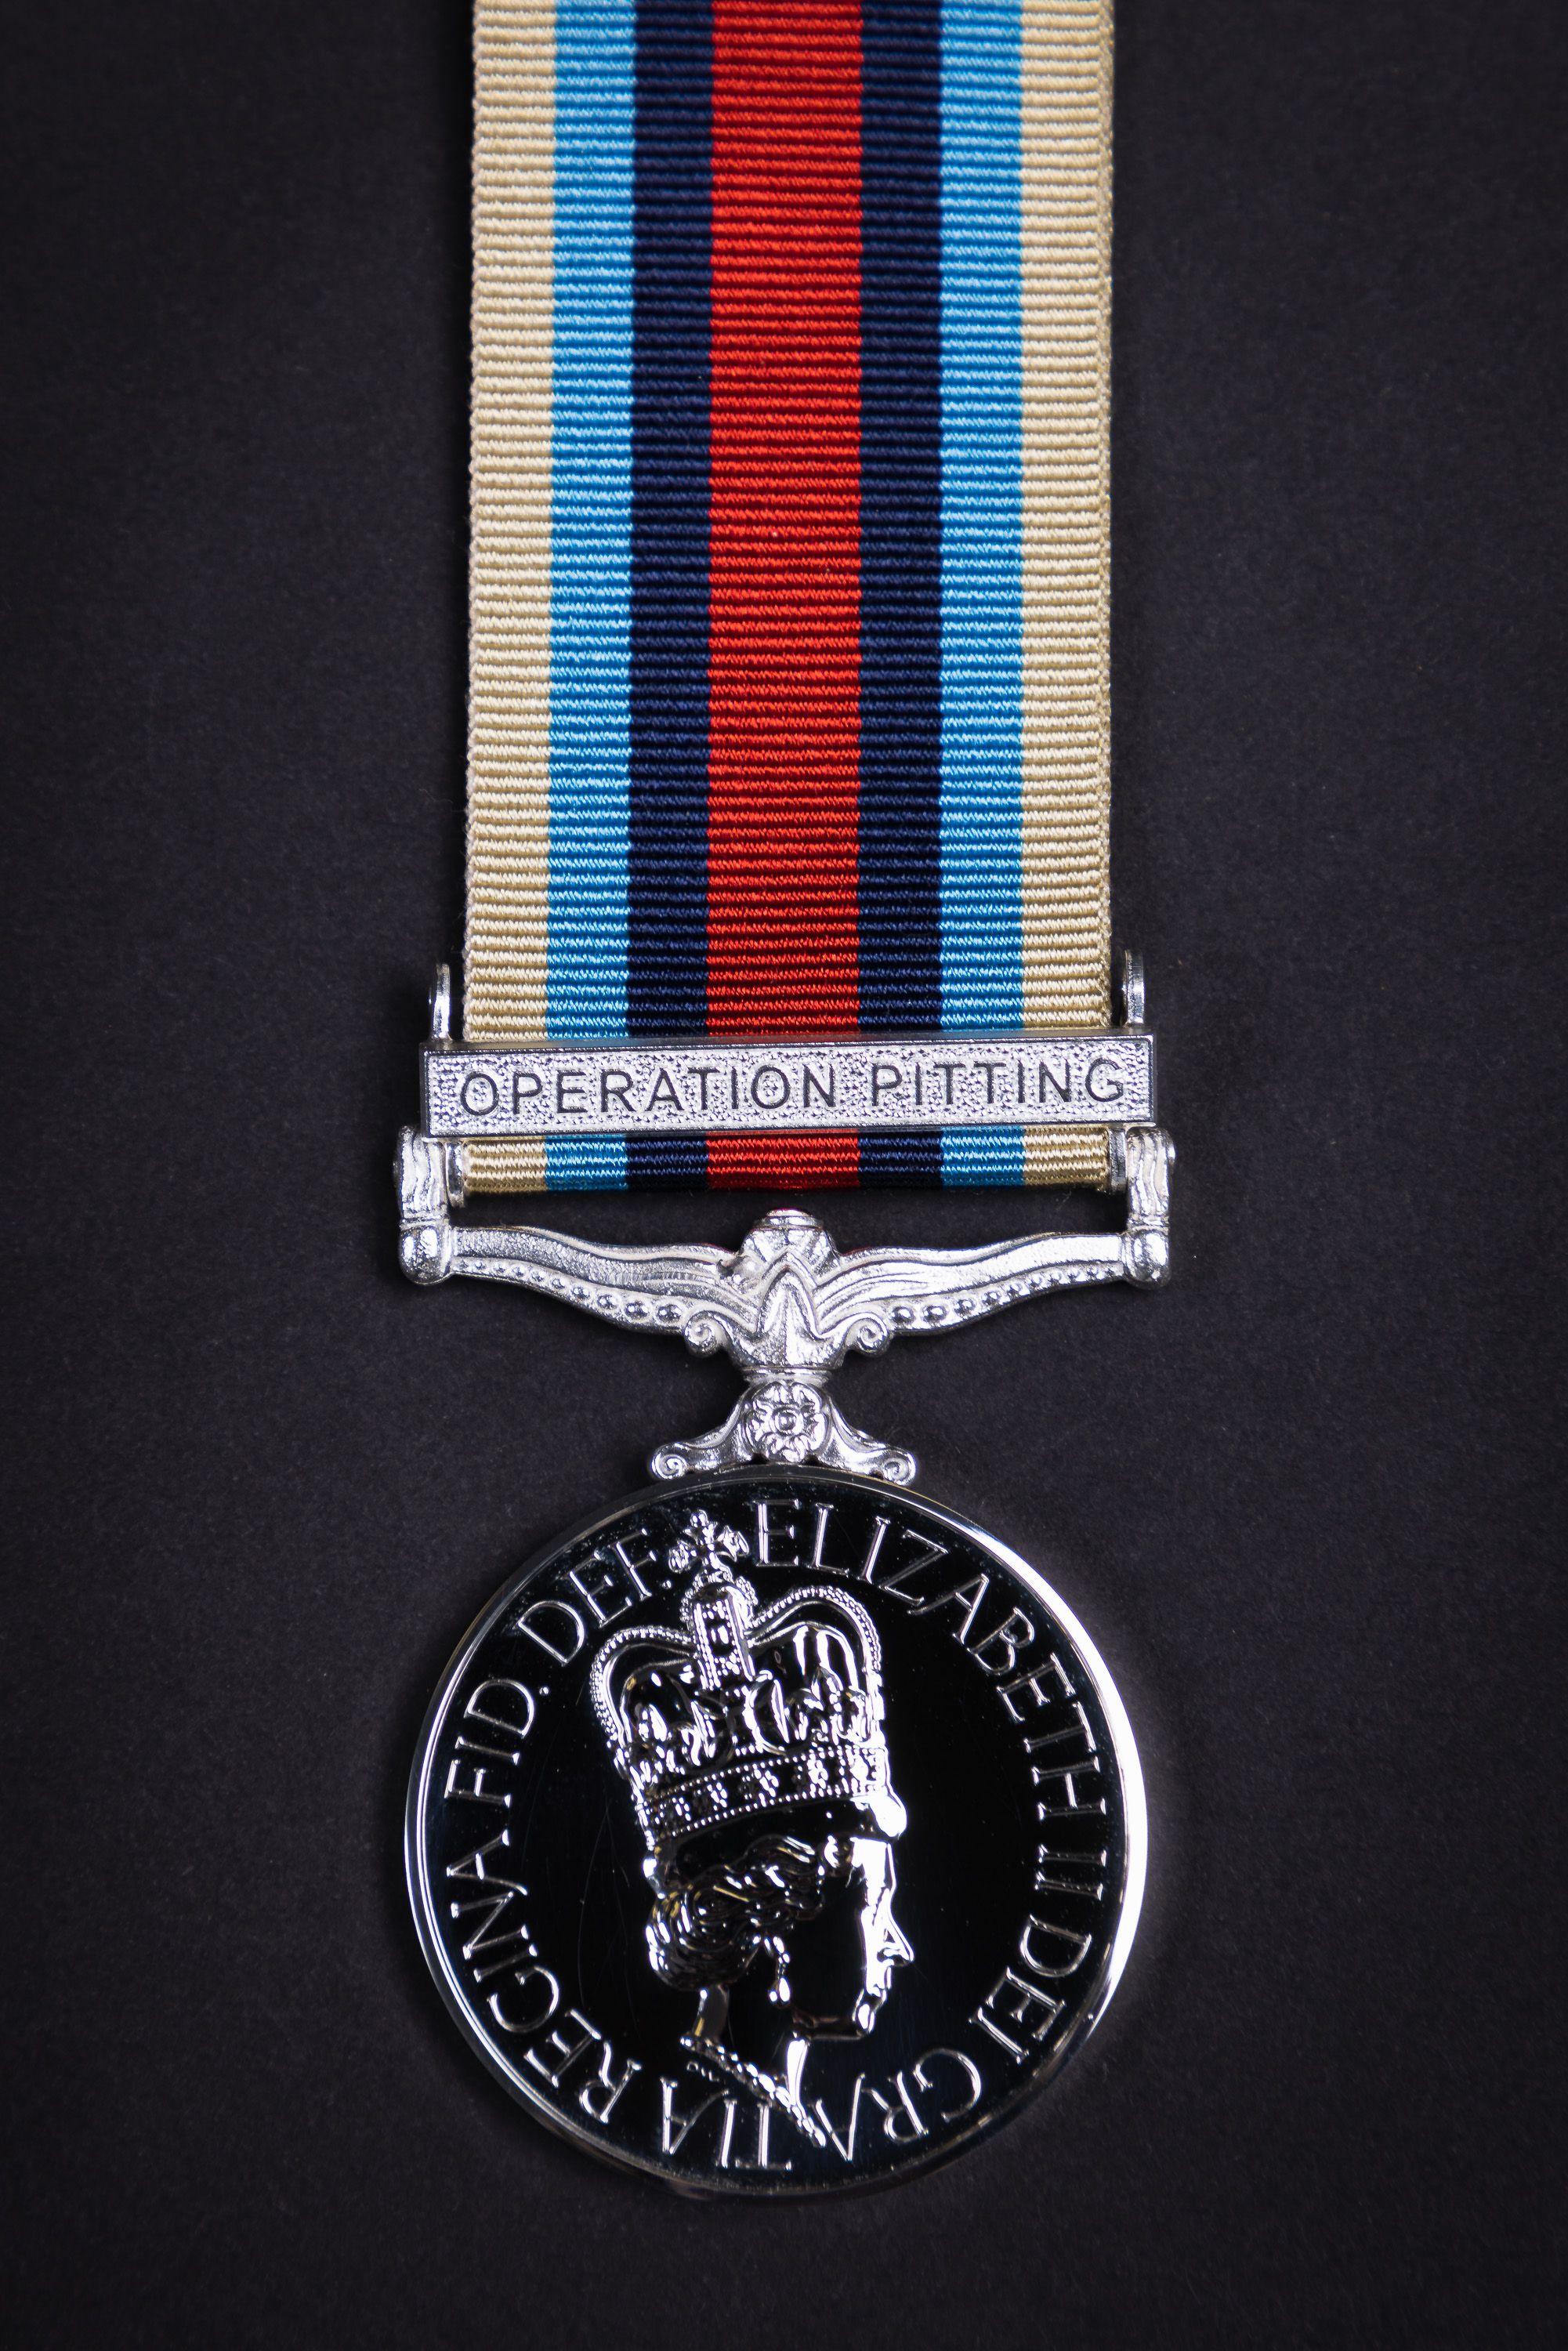 Medal with OPERATION PITTING engraved on.